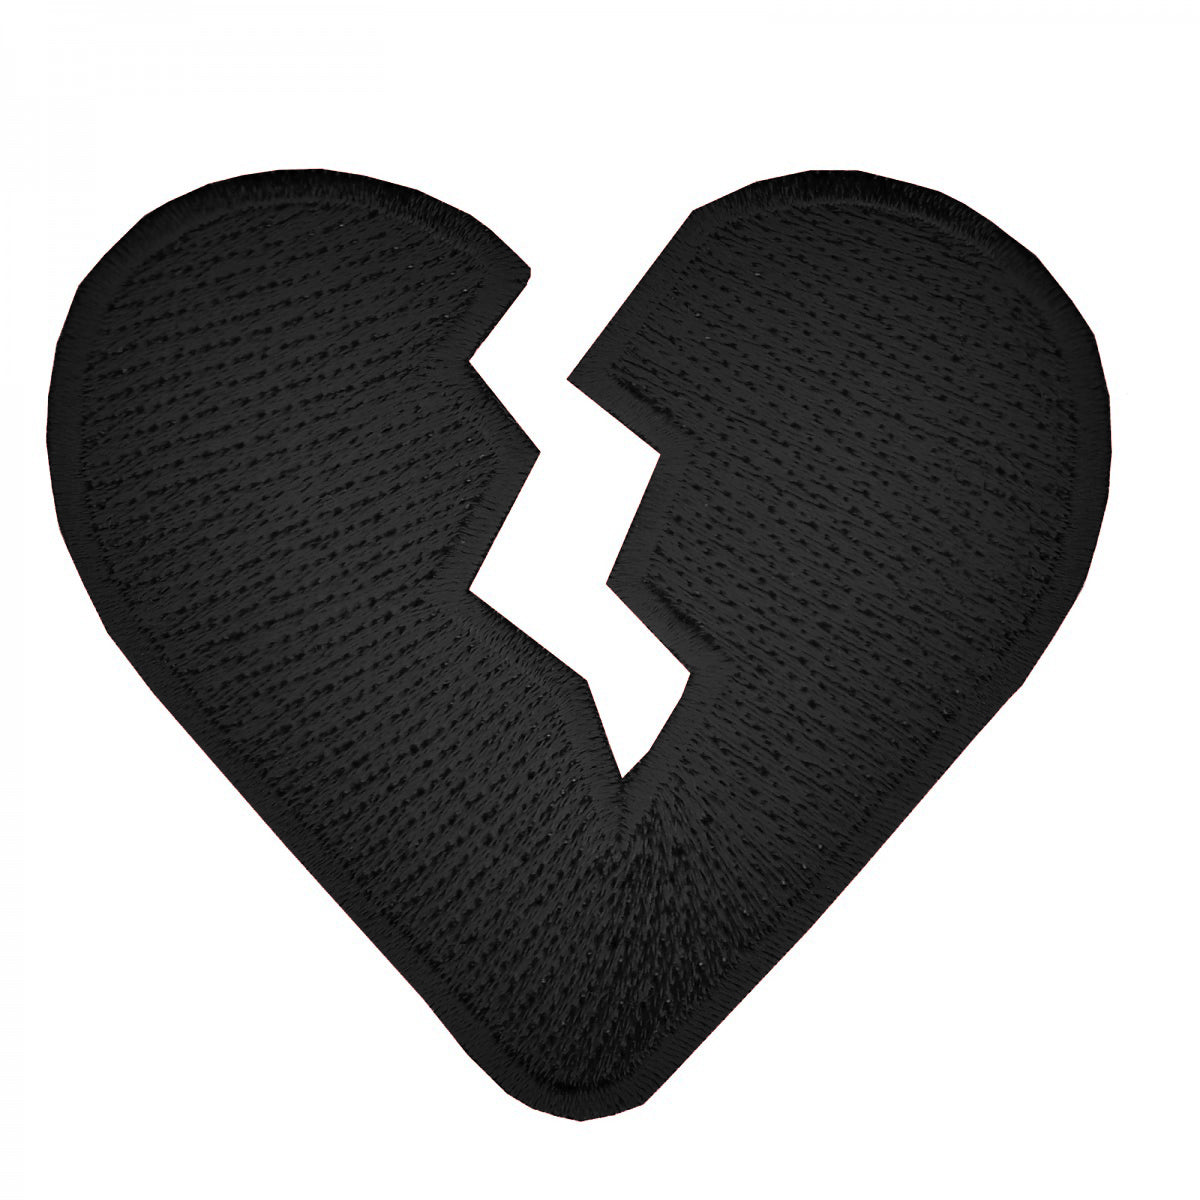 Broken Heart Embroidered Iron On Patch 